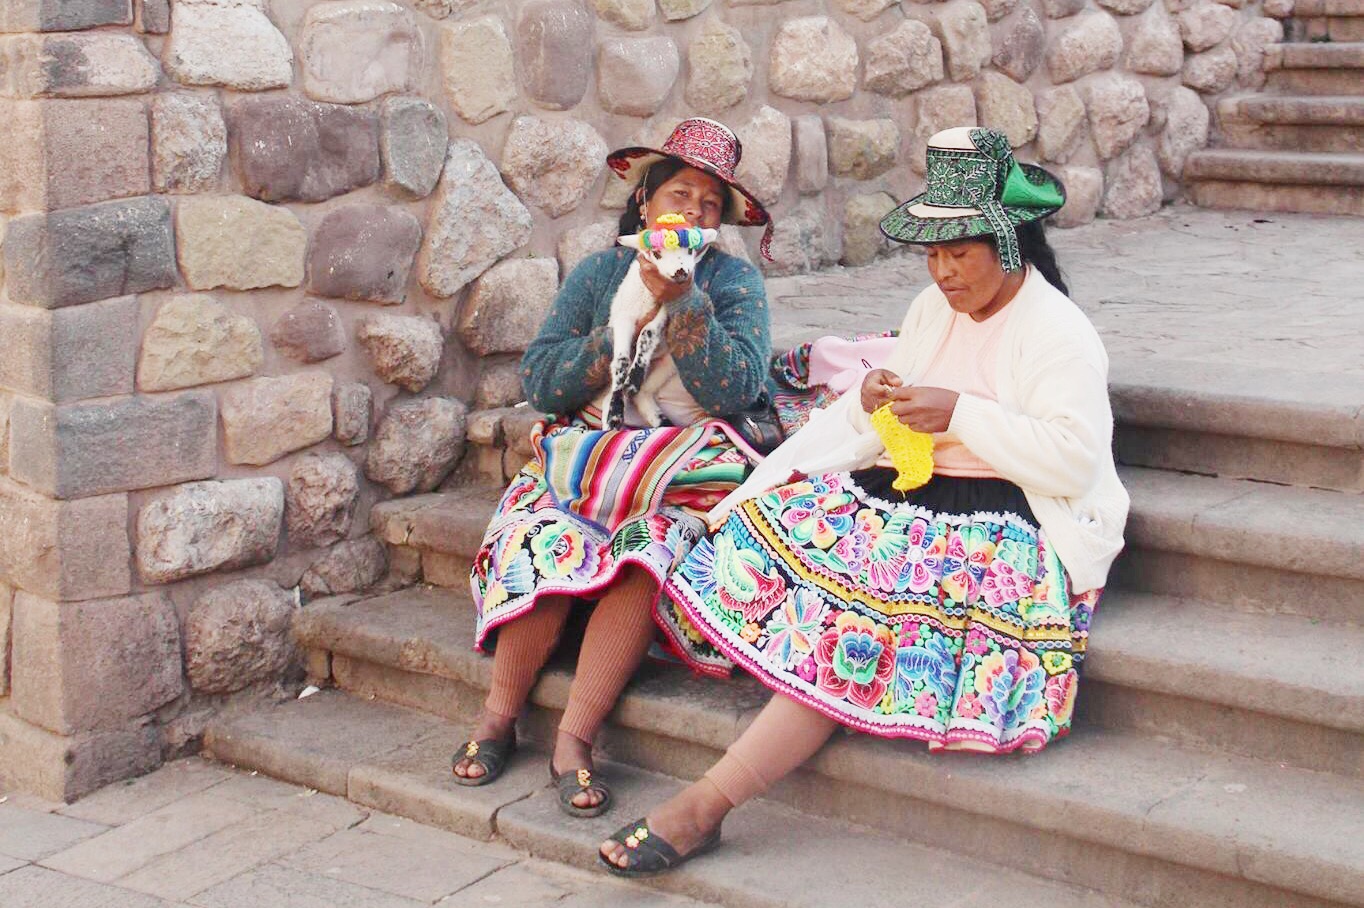 The 10 day 'South American Vacay': 1. PERU